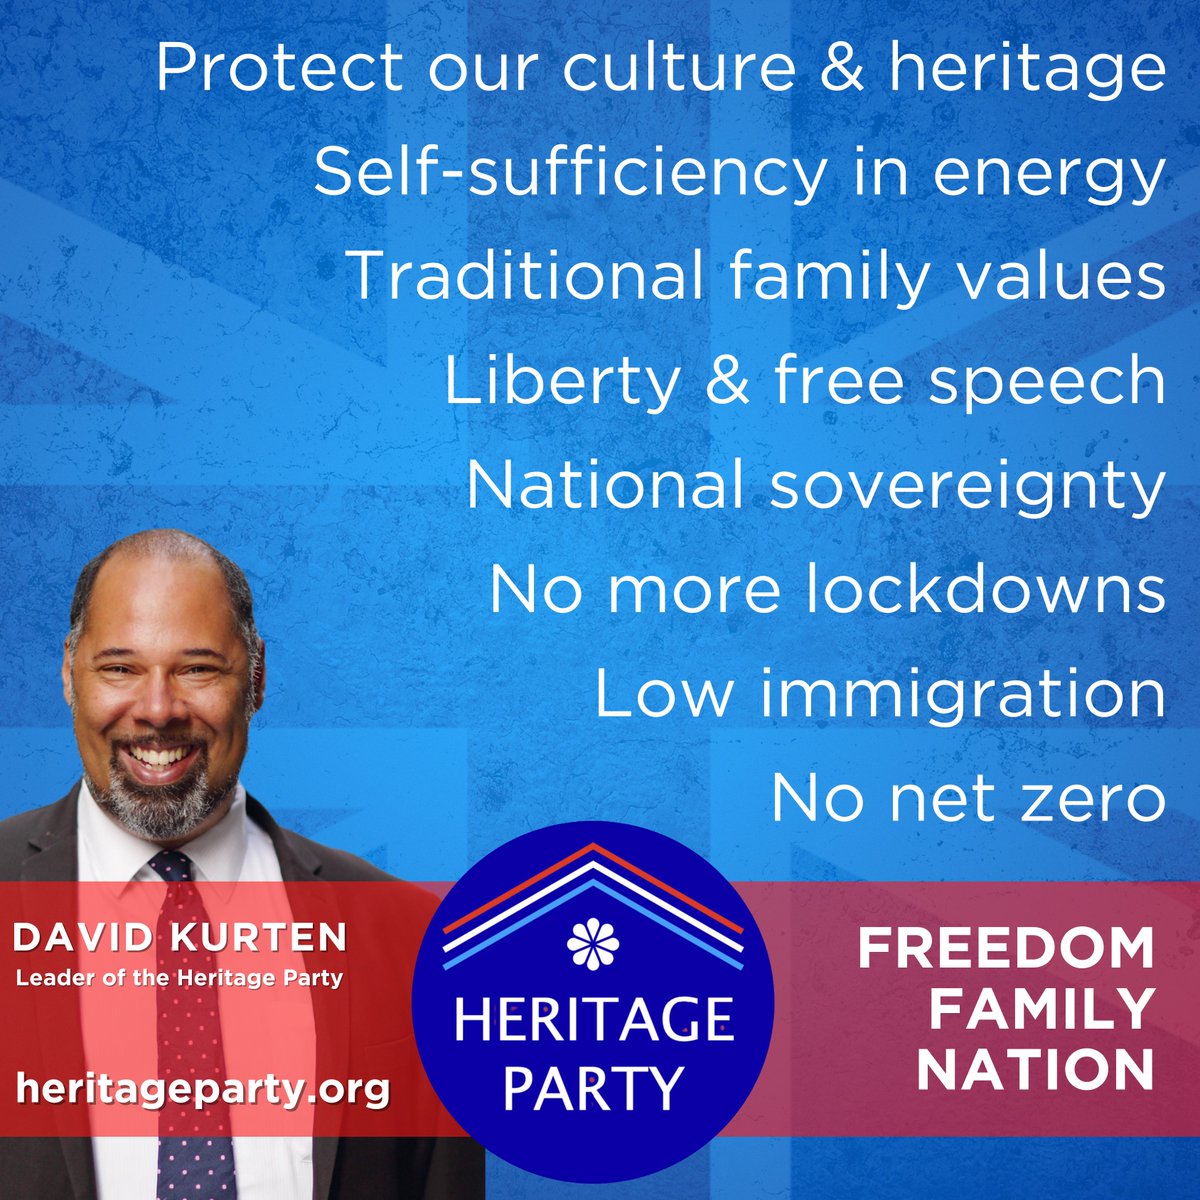 Let's restore sanity, common sense and prosperity to our nation. Join us today. heritageparty.org